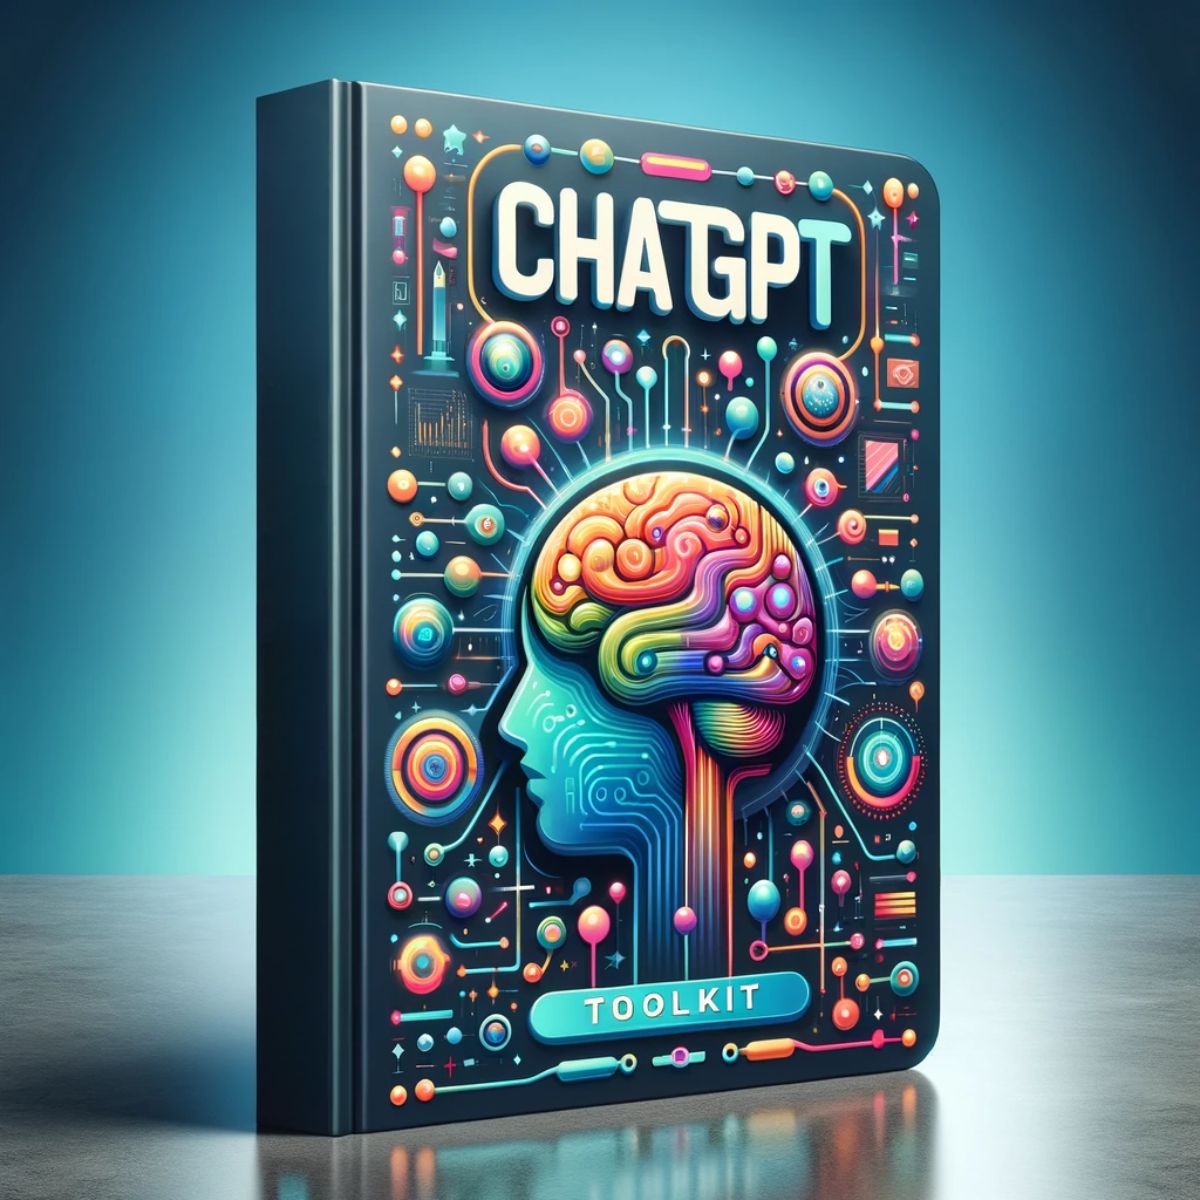 I just updated my ultimate ChatGPT Toolkit 1600+ Resources to Master ChatGPT. • 550 AI Tools • 1000 Prompts • 15 Prompt Writing Tips • 17 ChatGPT/AI Cheat Sheets • 50 Marketing Mega Prompts 📌 To get this FREE guide: 1. Comment 'Guide' 2. Repost 3. Follow me for DM